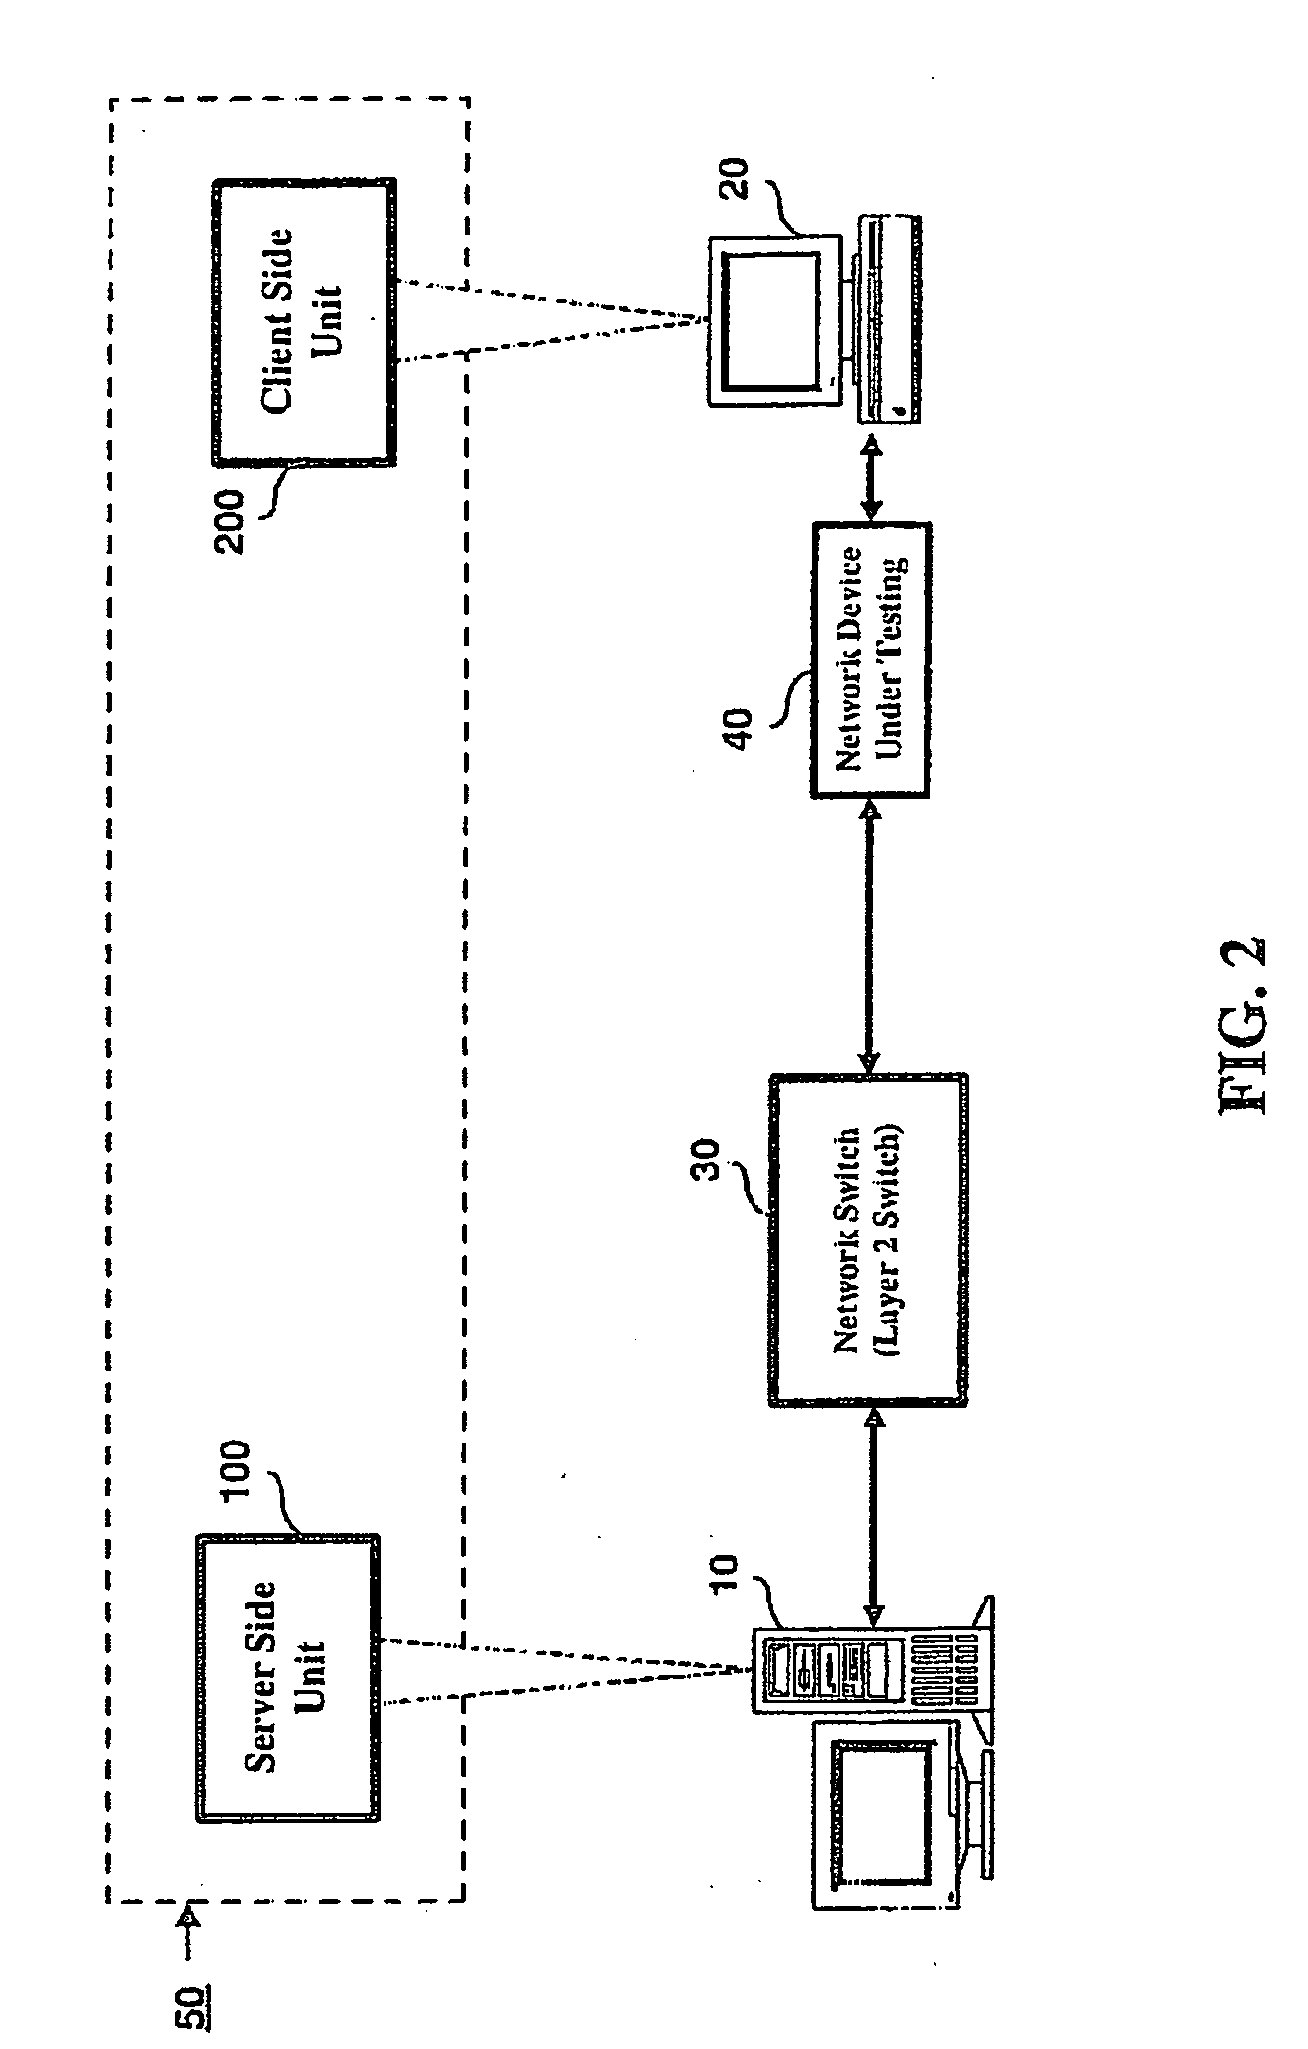 Network equipment testing method and system